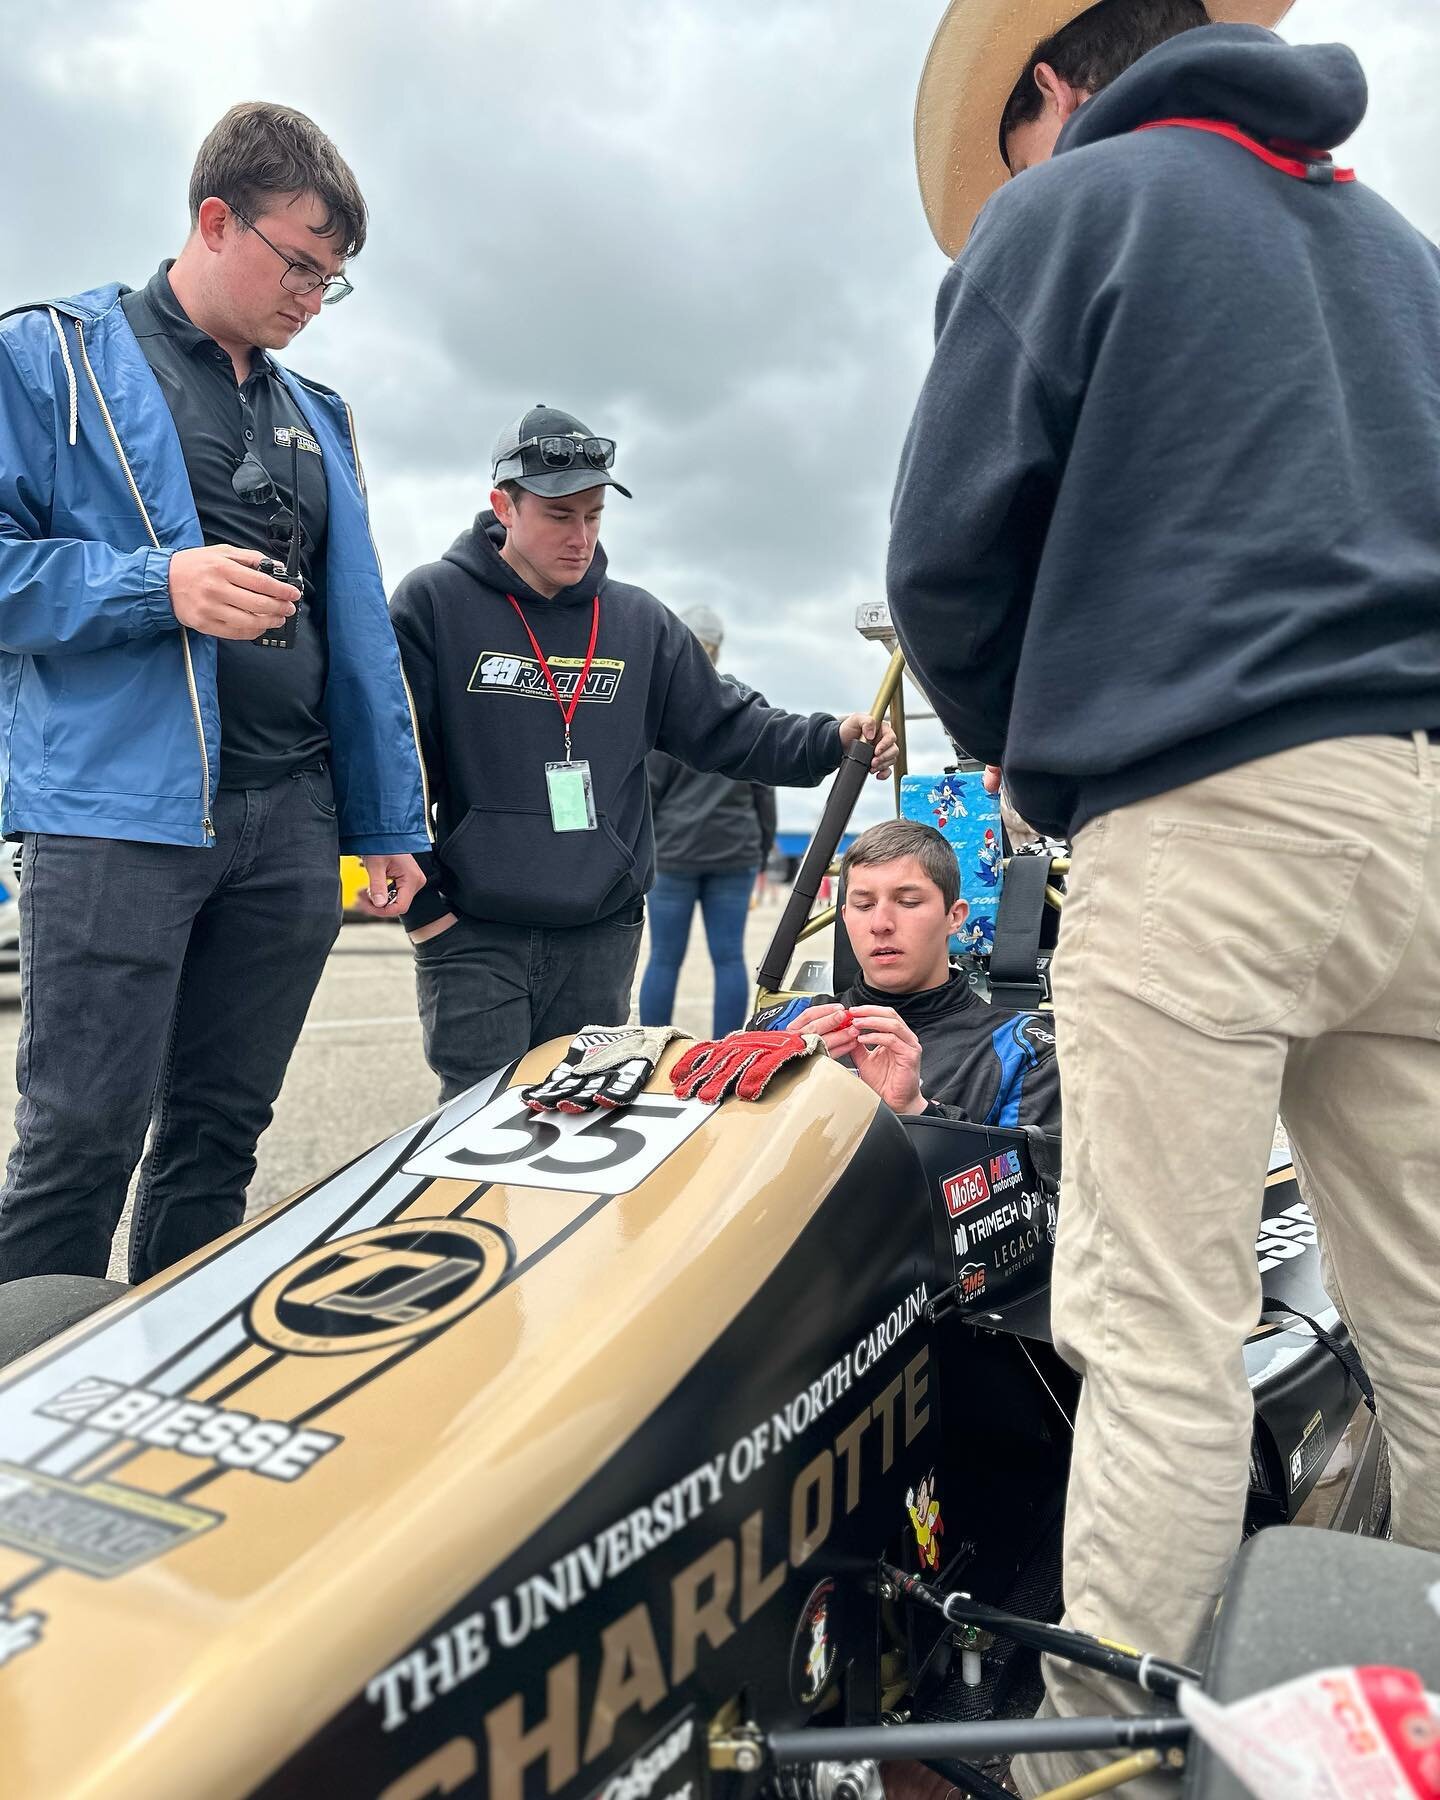 We&rsquo;ve had a great time at competition this year. We just wrapped up our last test, and we can&rsquo;t wait to show you all that we&rsquo;ve done. 

#FSAE #engineering #nascar #racing #f1 #clt #49ersRacing #comp